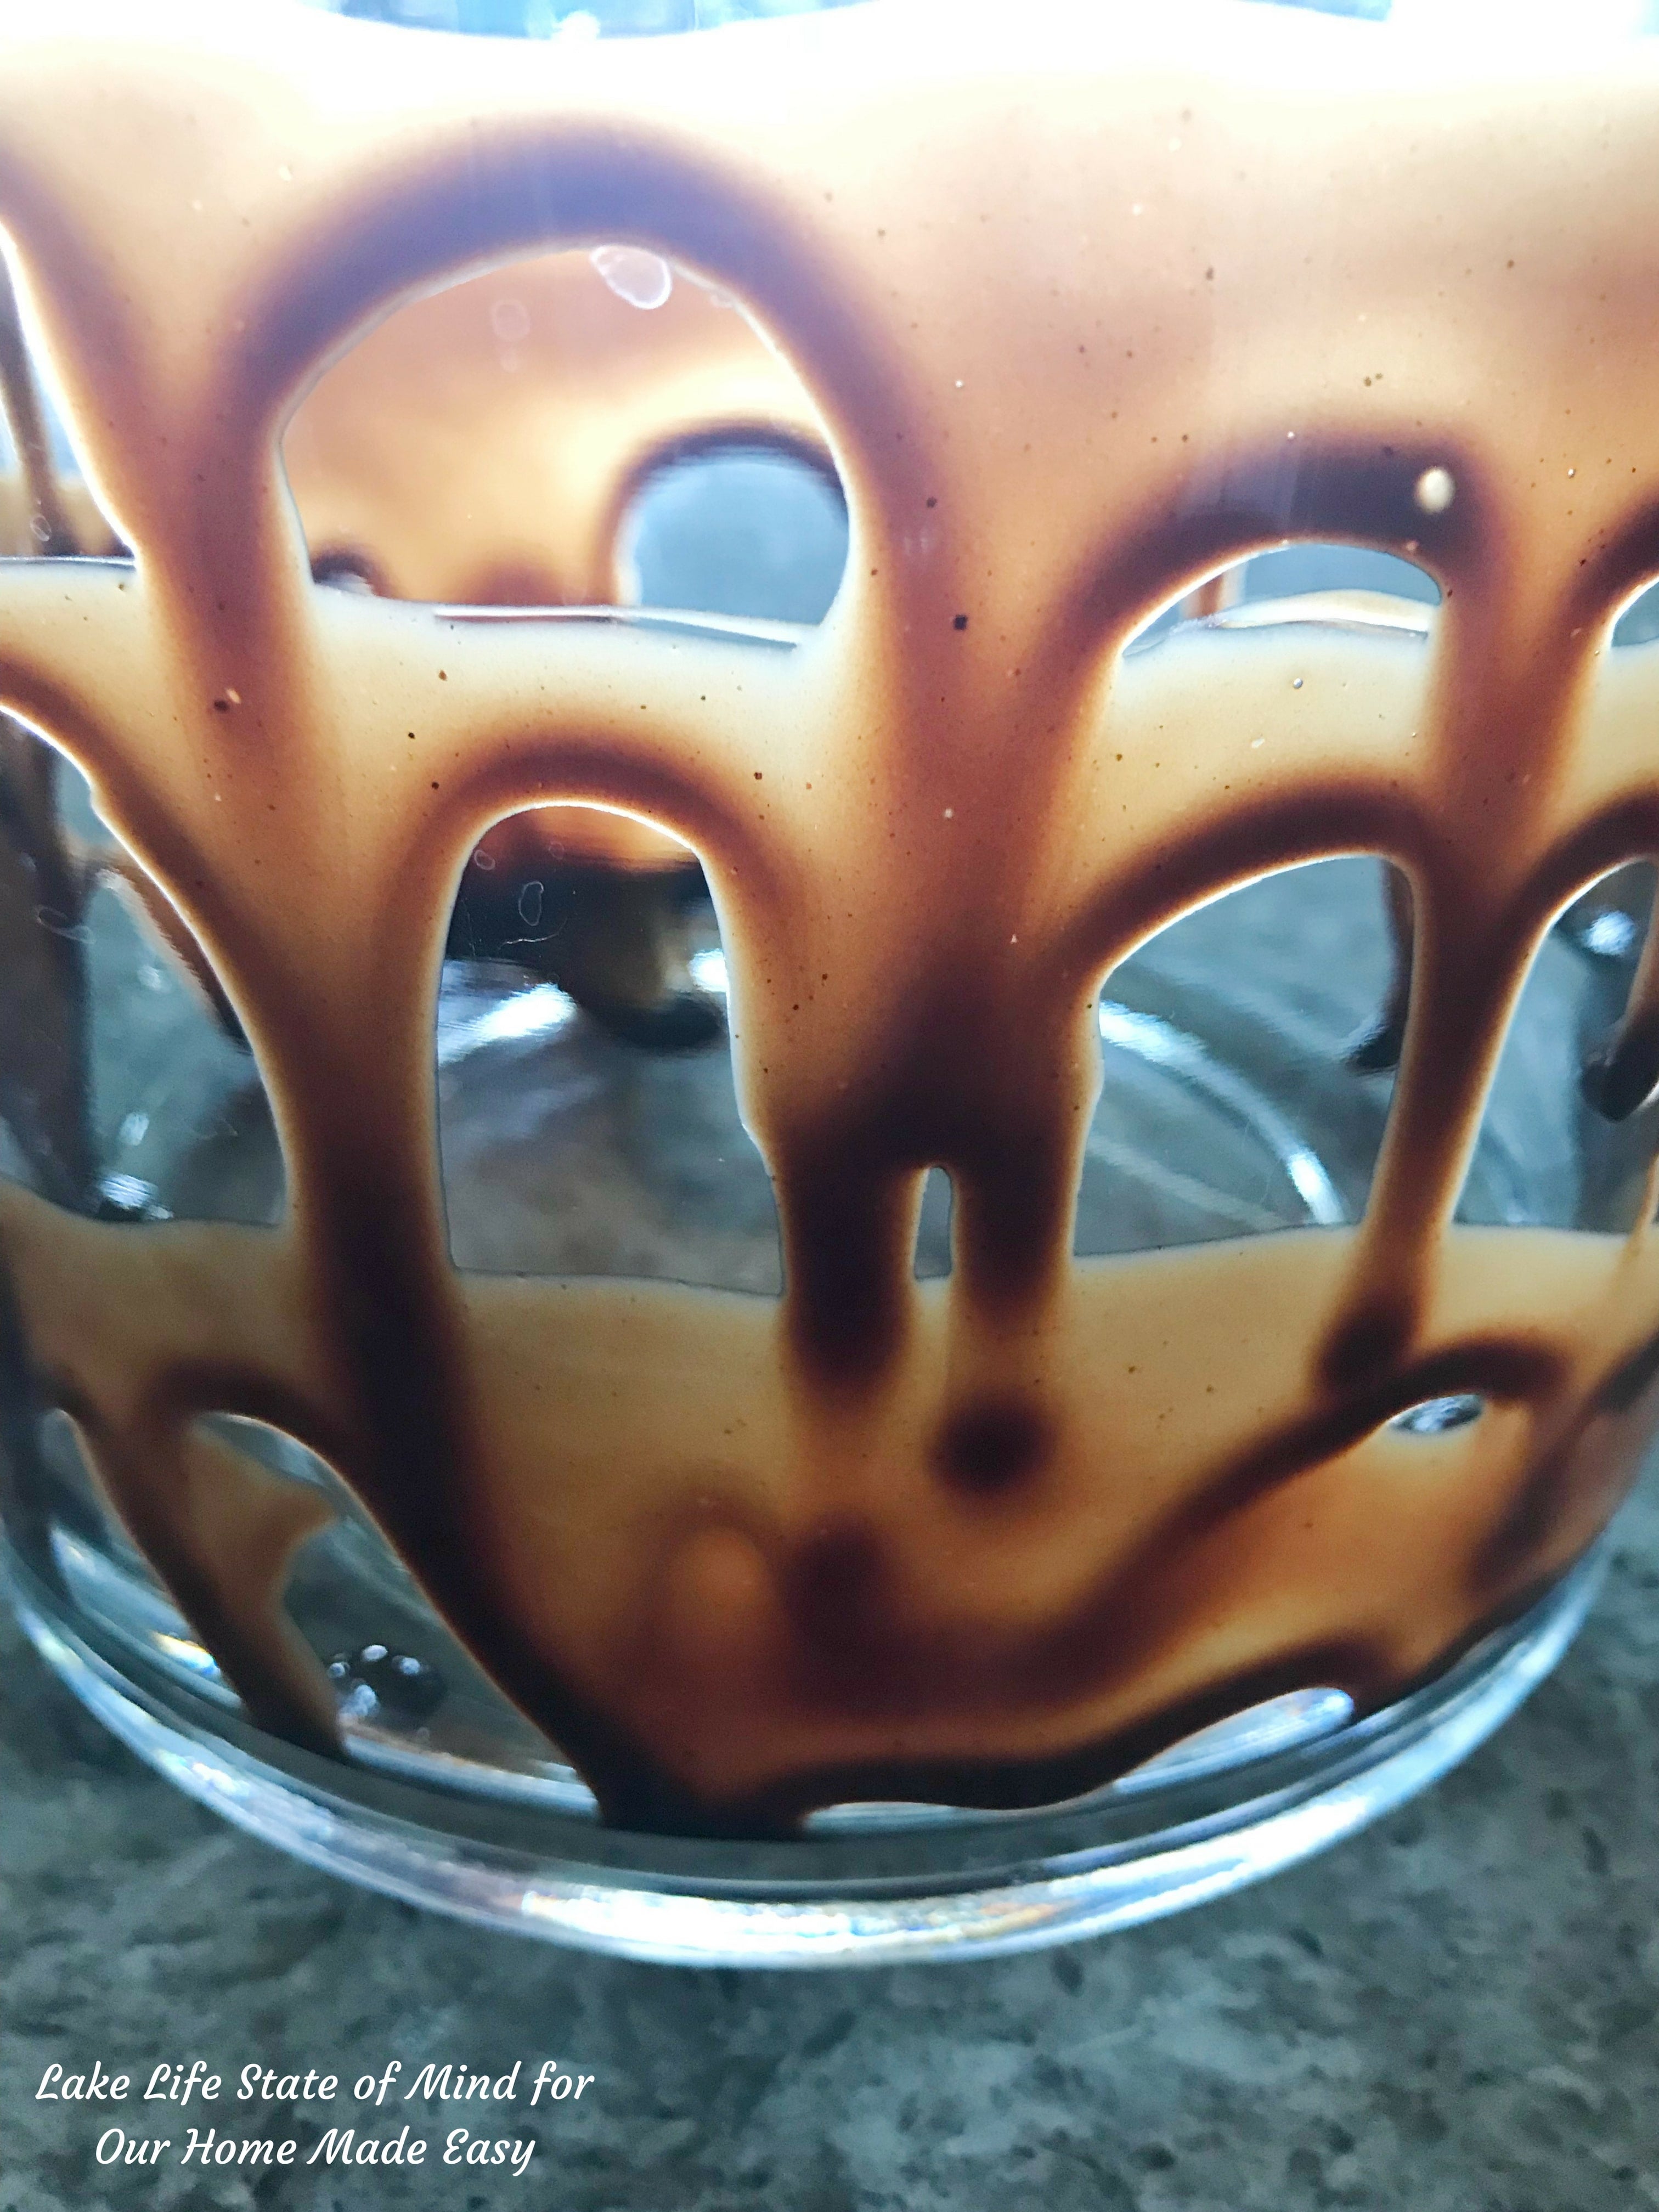 Decadent chocolate syrup coats the inside of the ice cream dish 